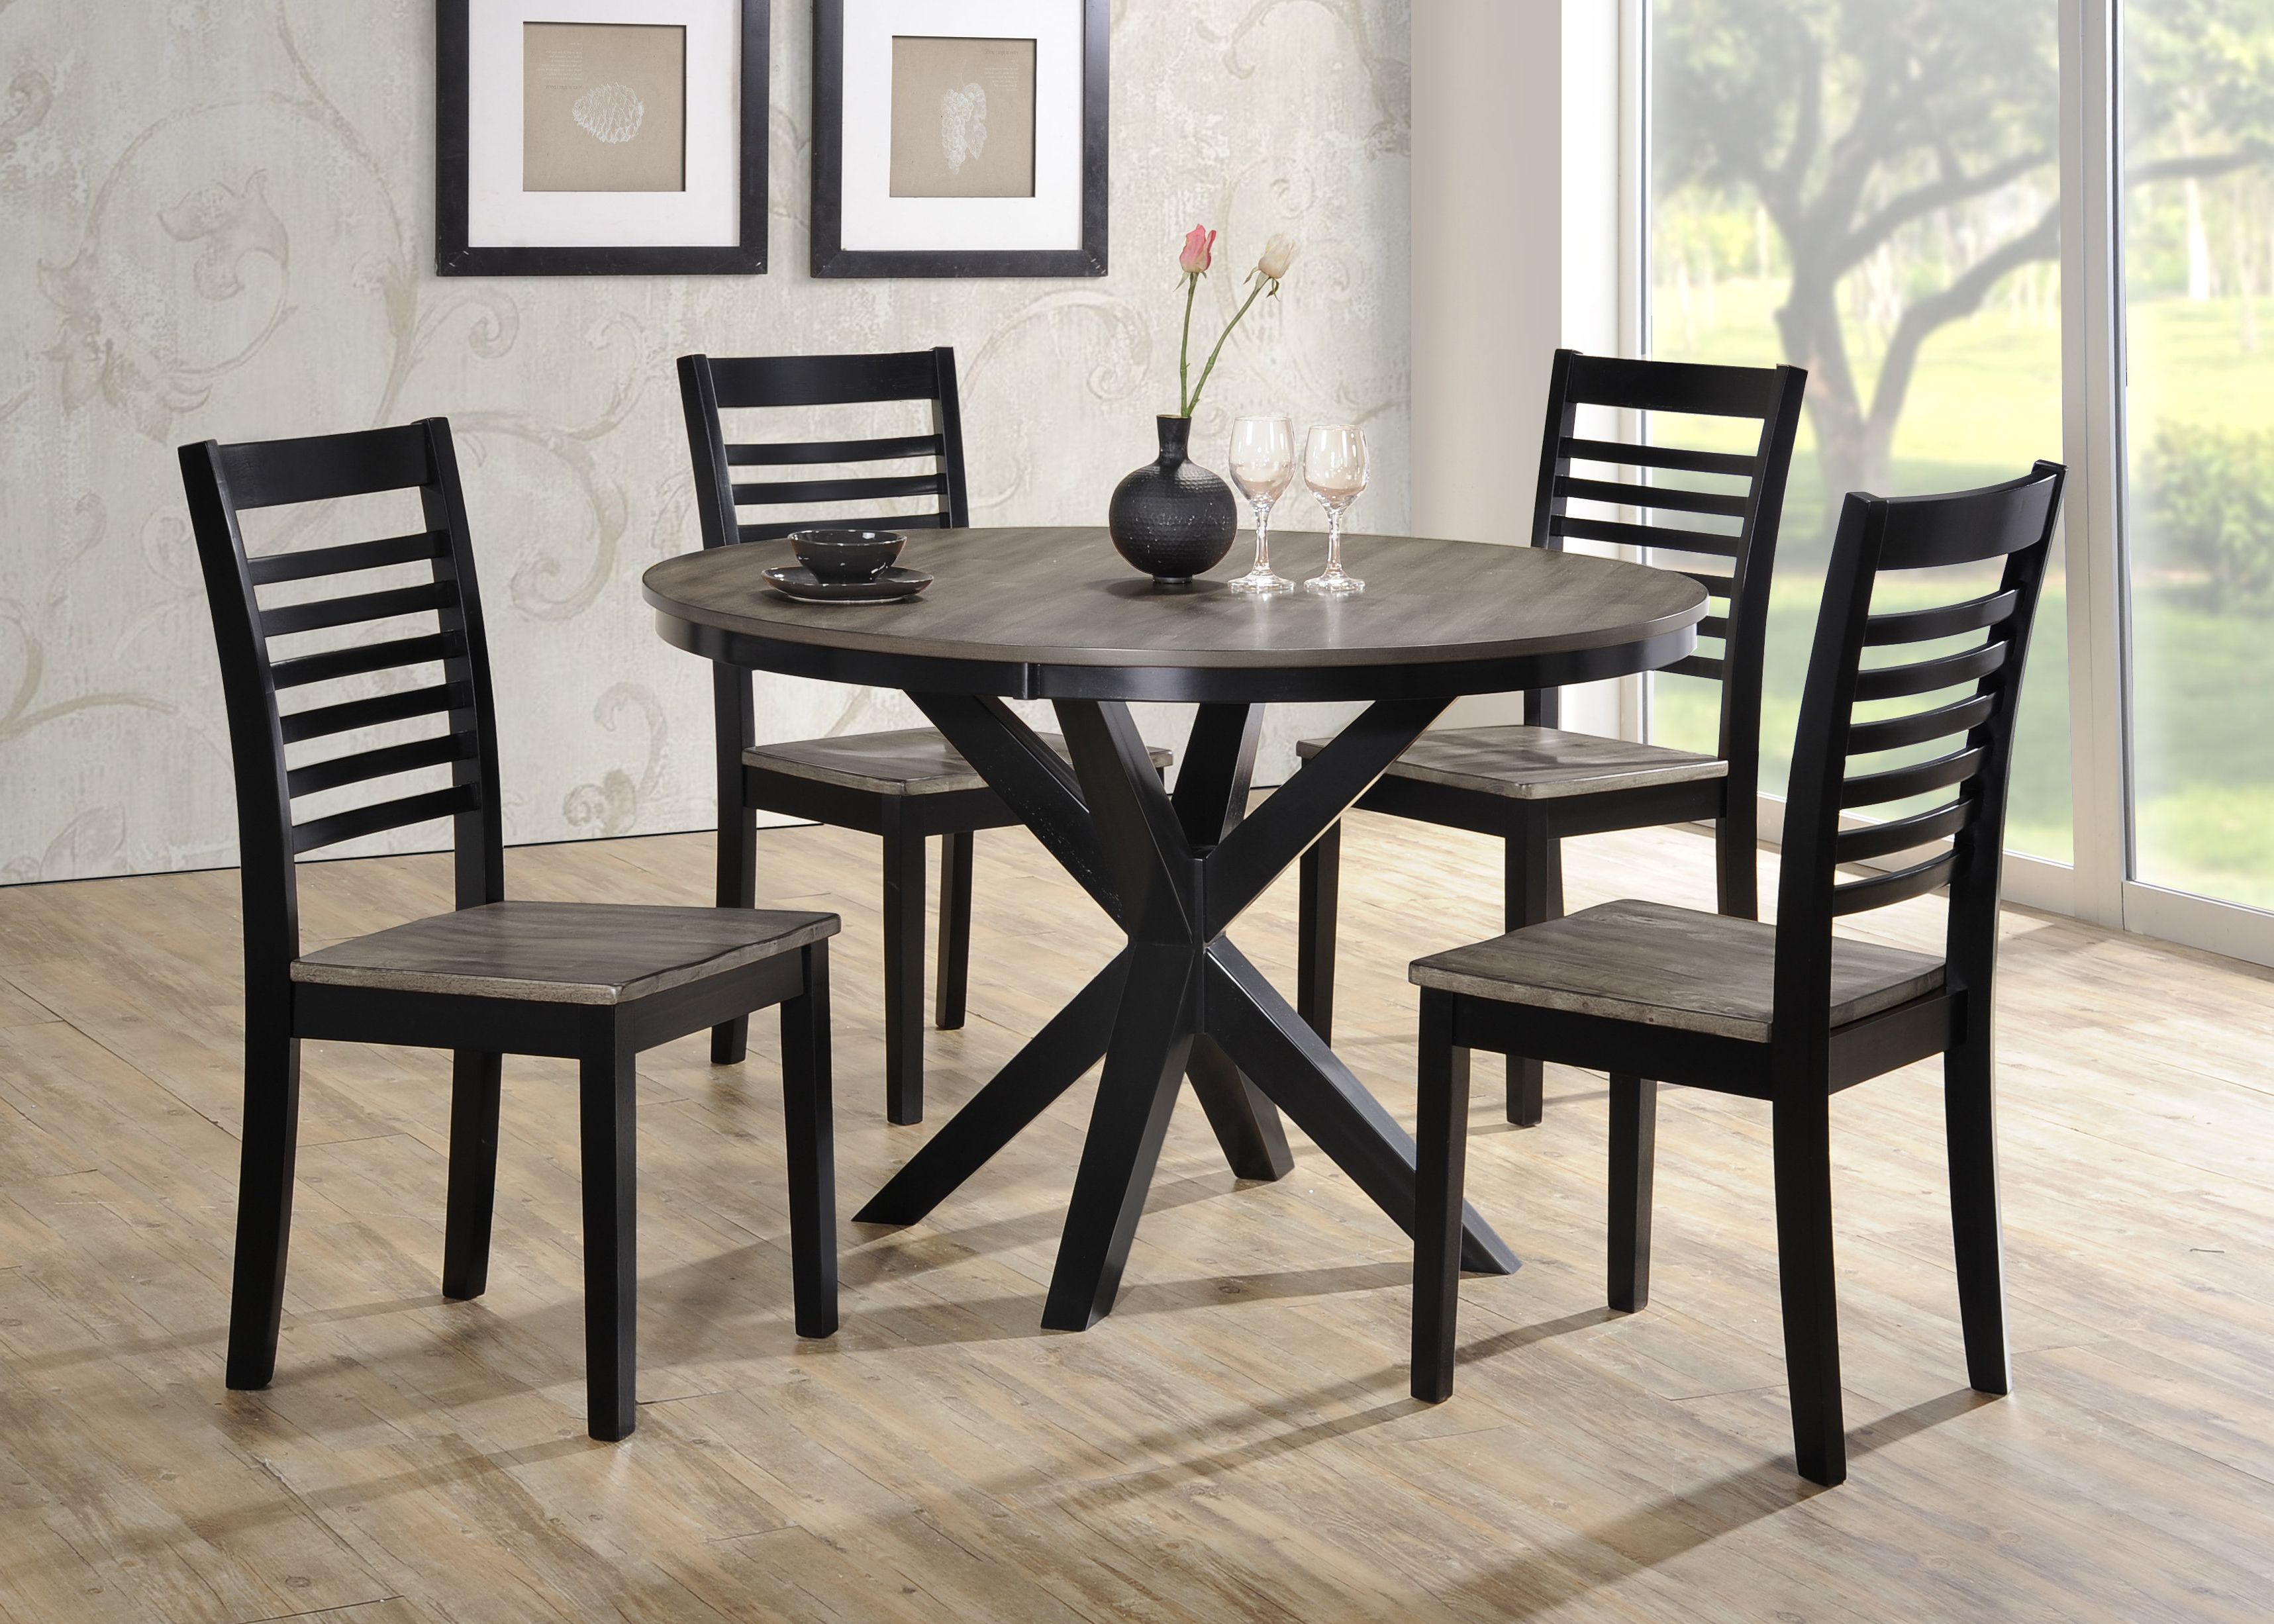 2019 Red Barrel Studio Clipper City 5 Piece Dining Set & Reviews (View 17 of 25)